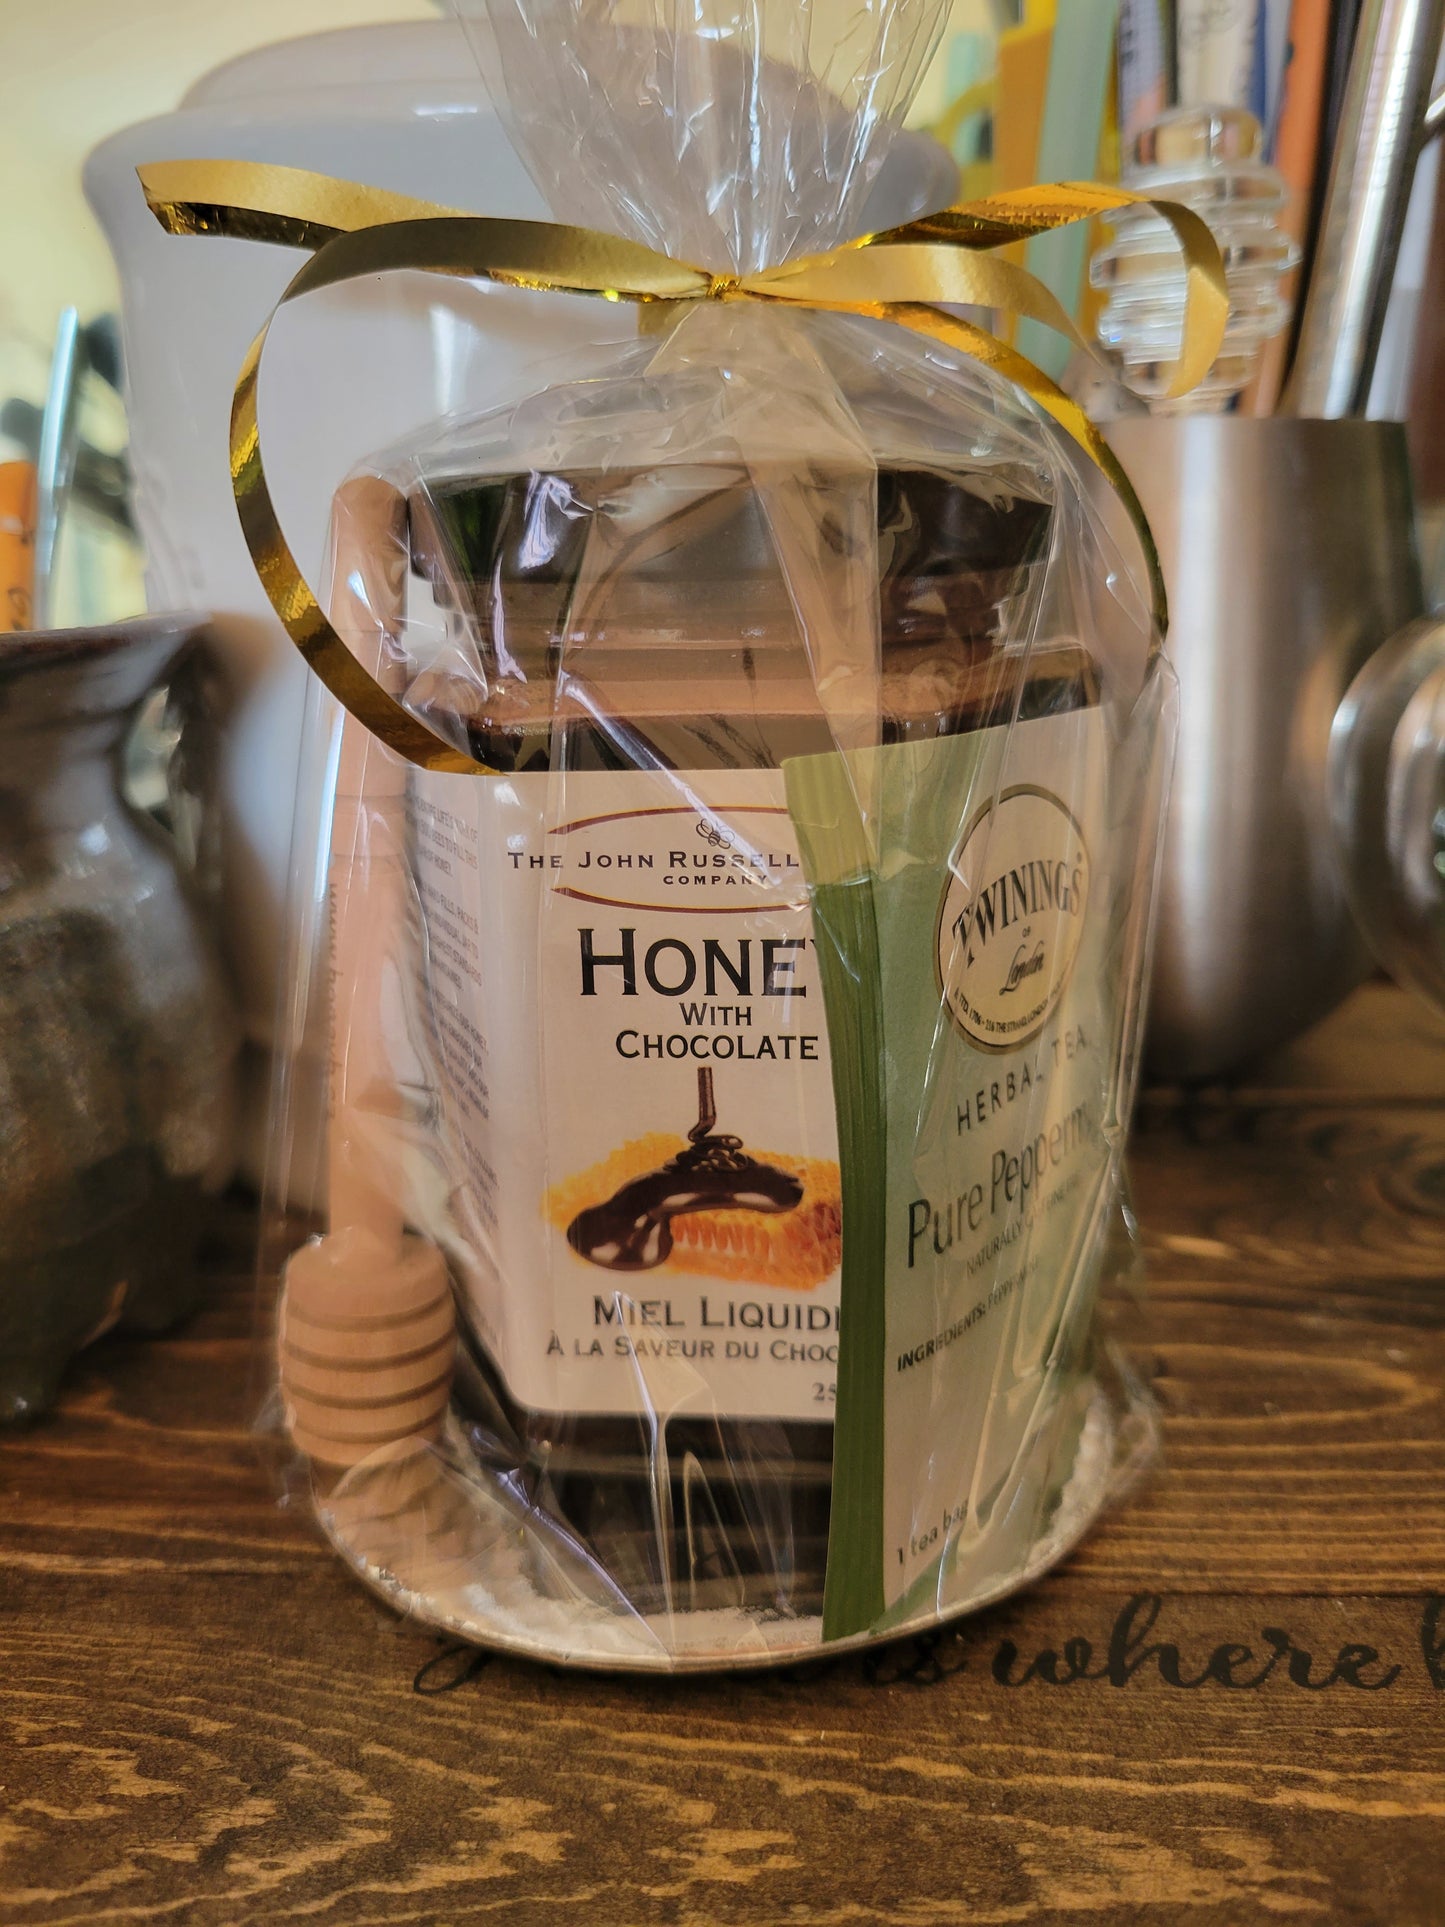 Tea and dipper gift pack – The John Russell Honey Company